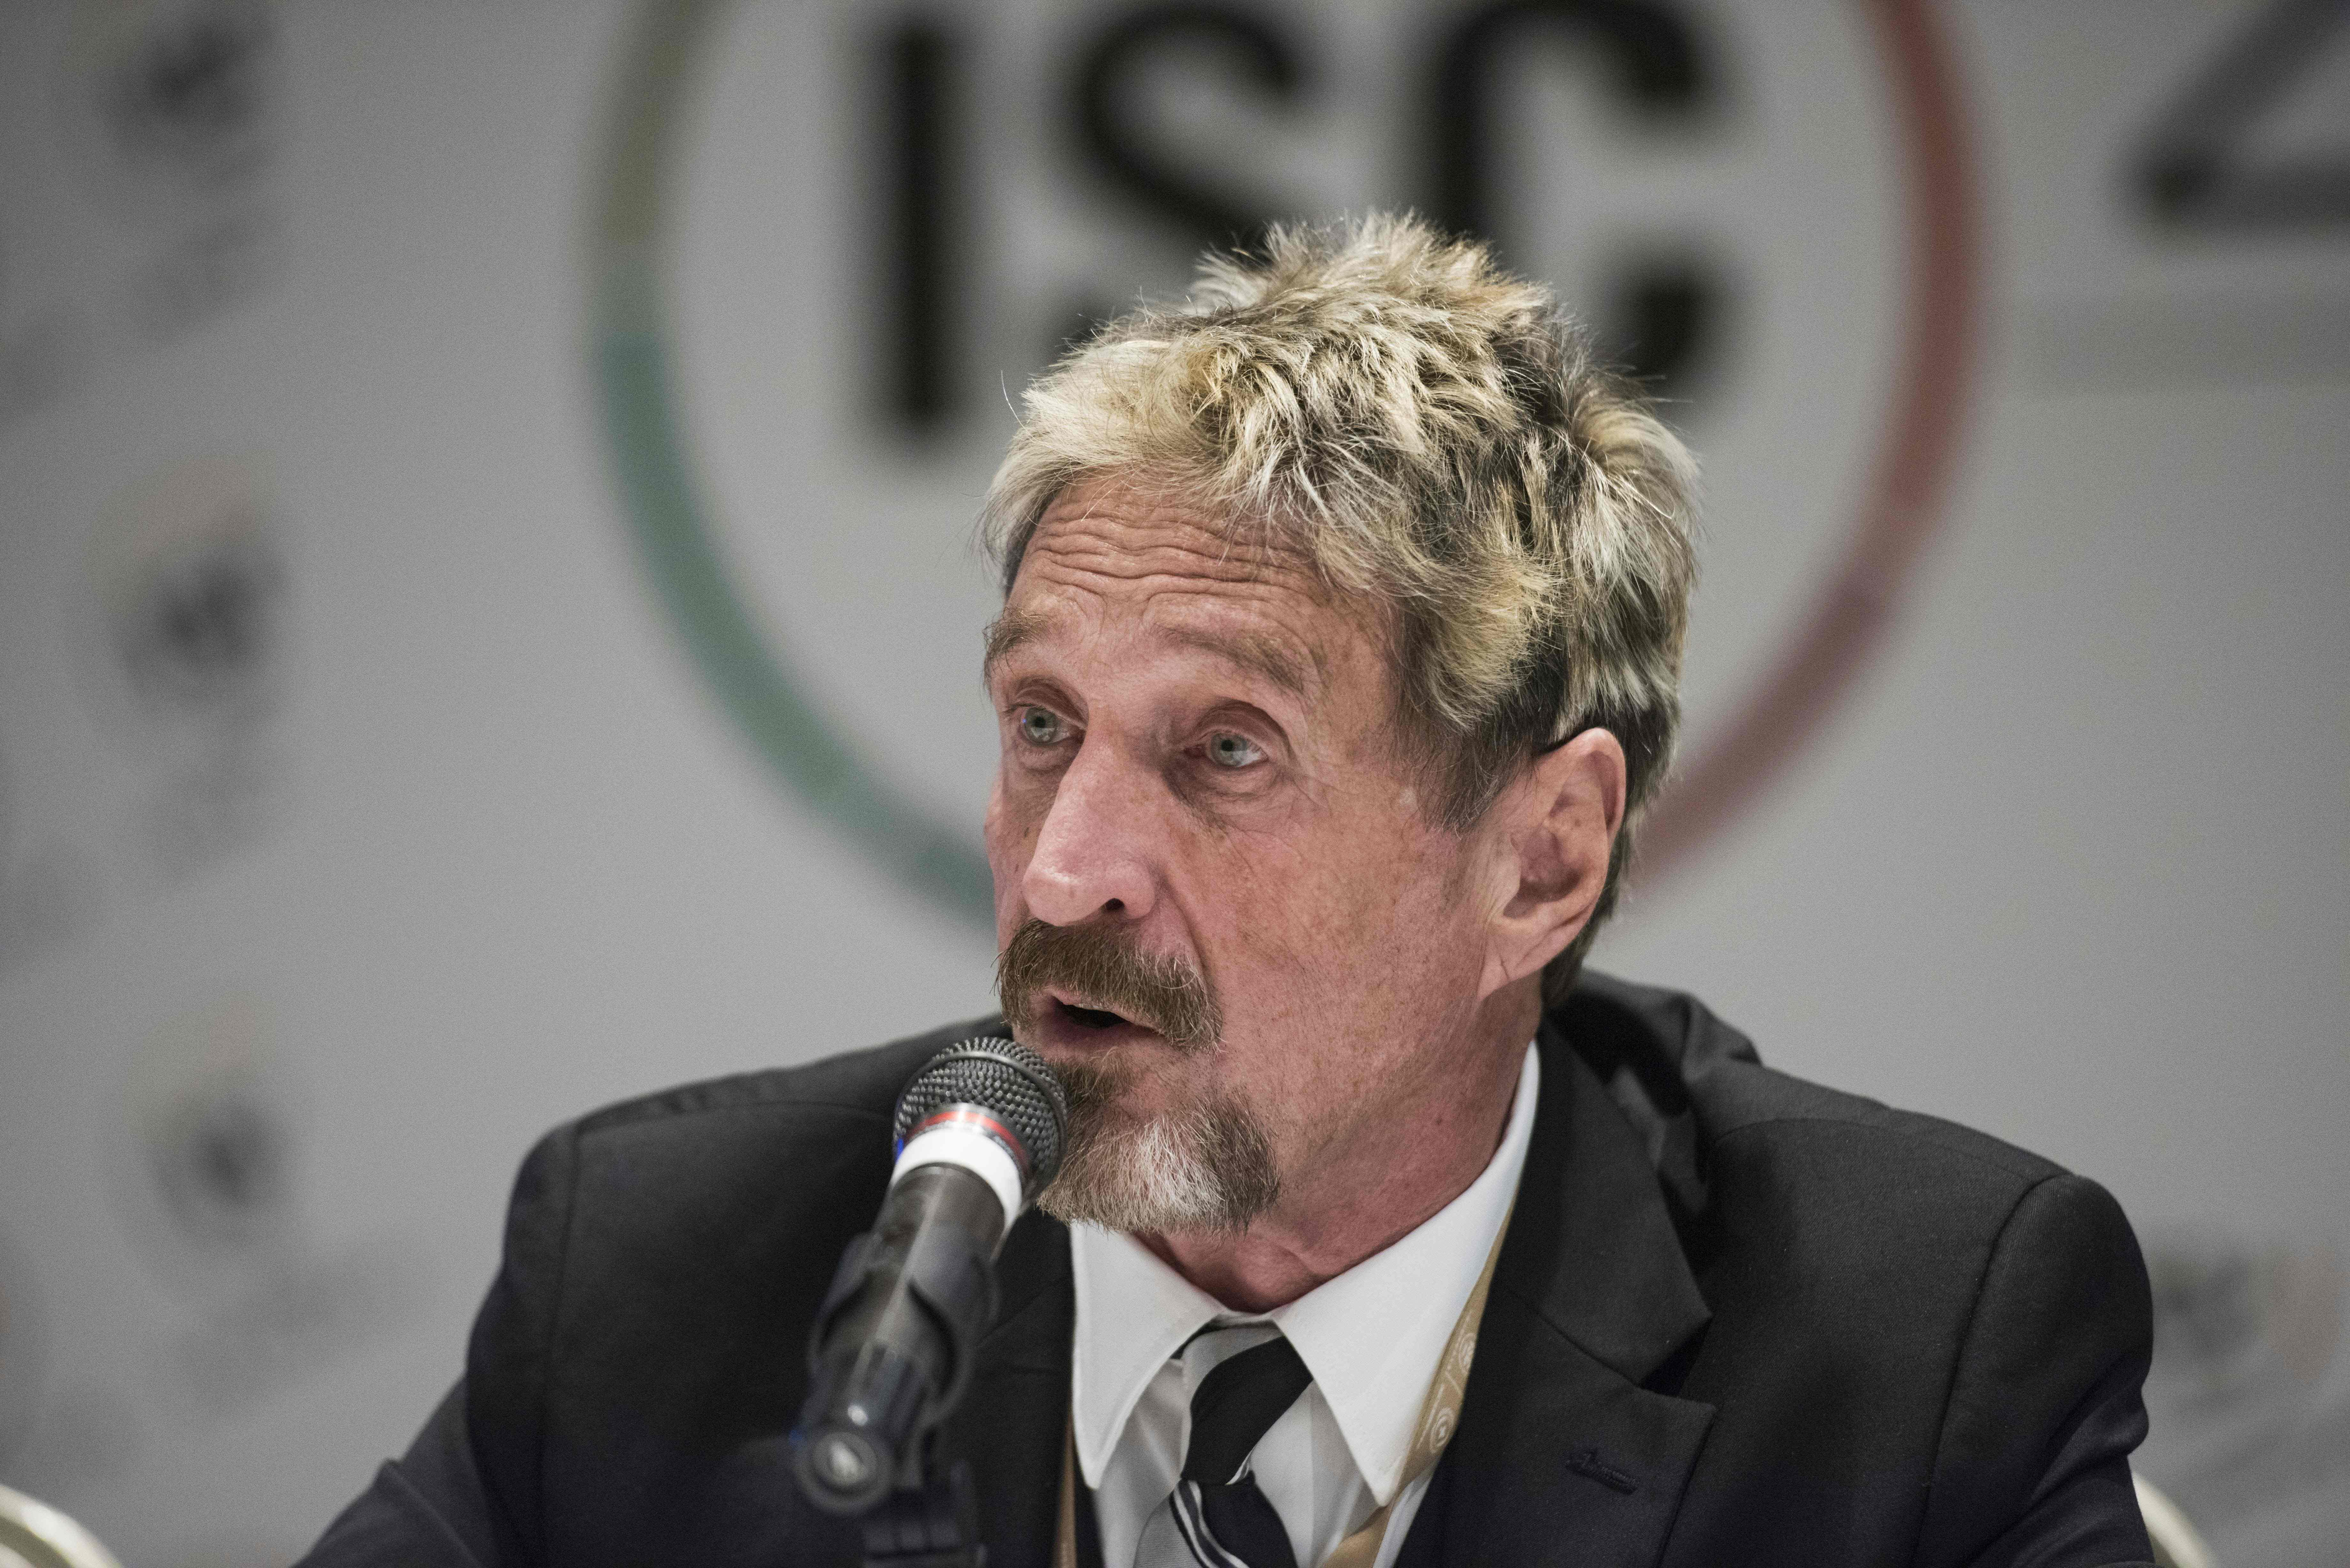 Bitcoin Price Will Reach $1 Million in , Or You’re an Idiot: John McAfee